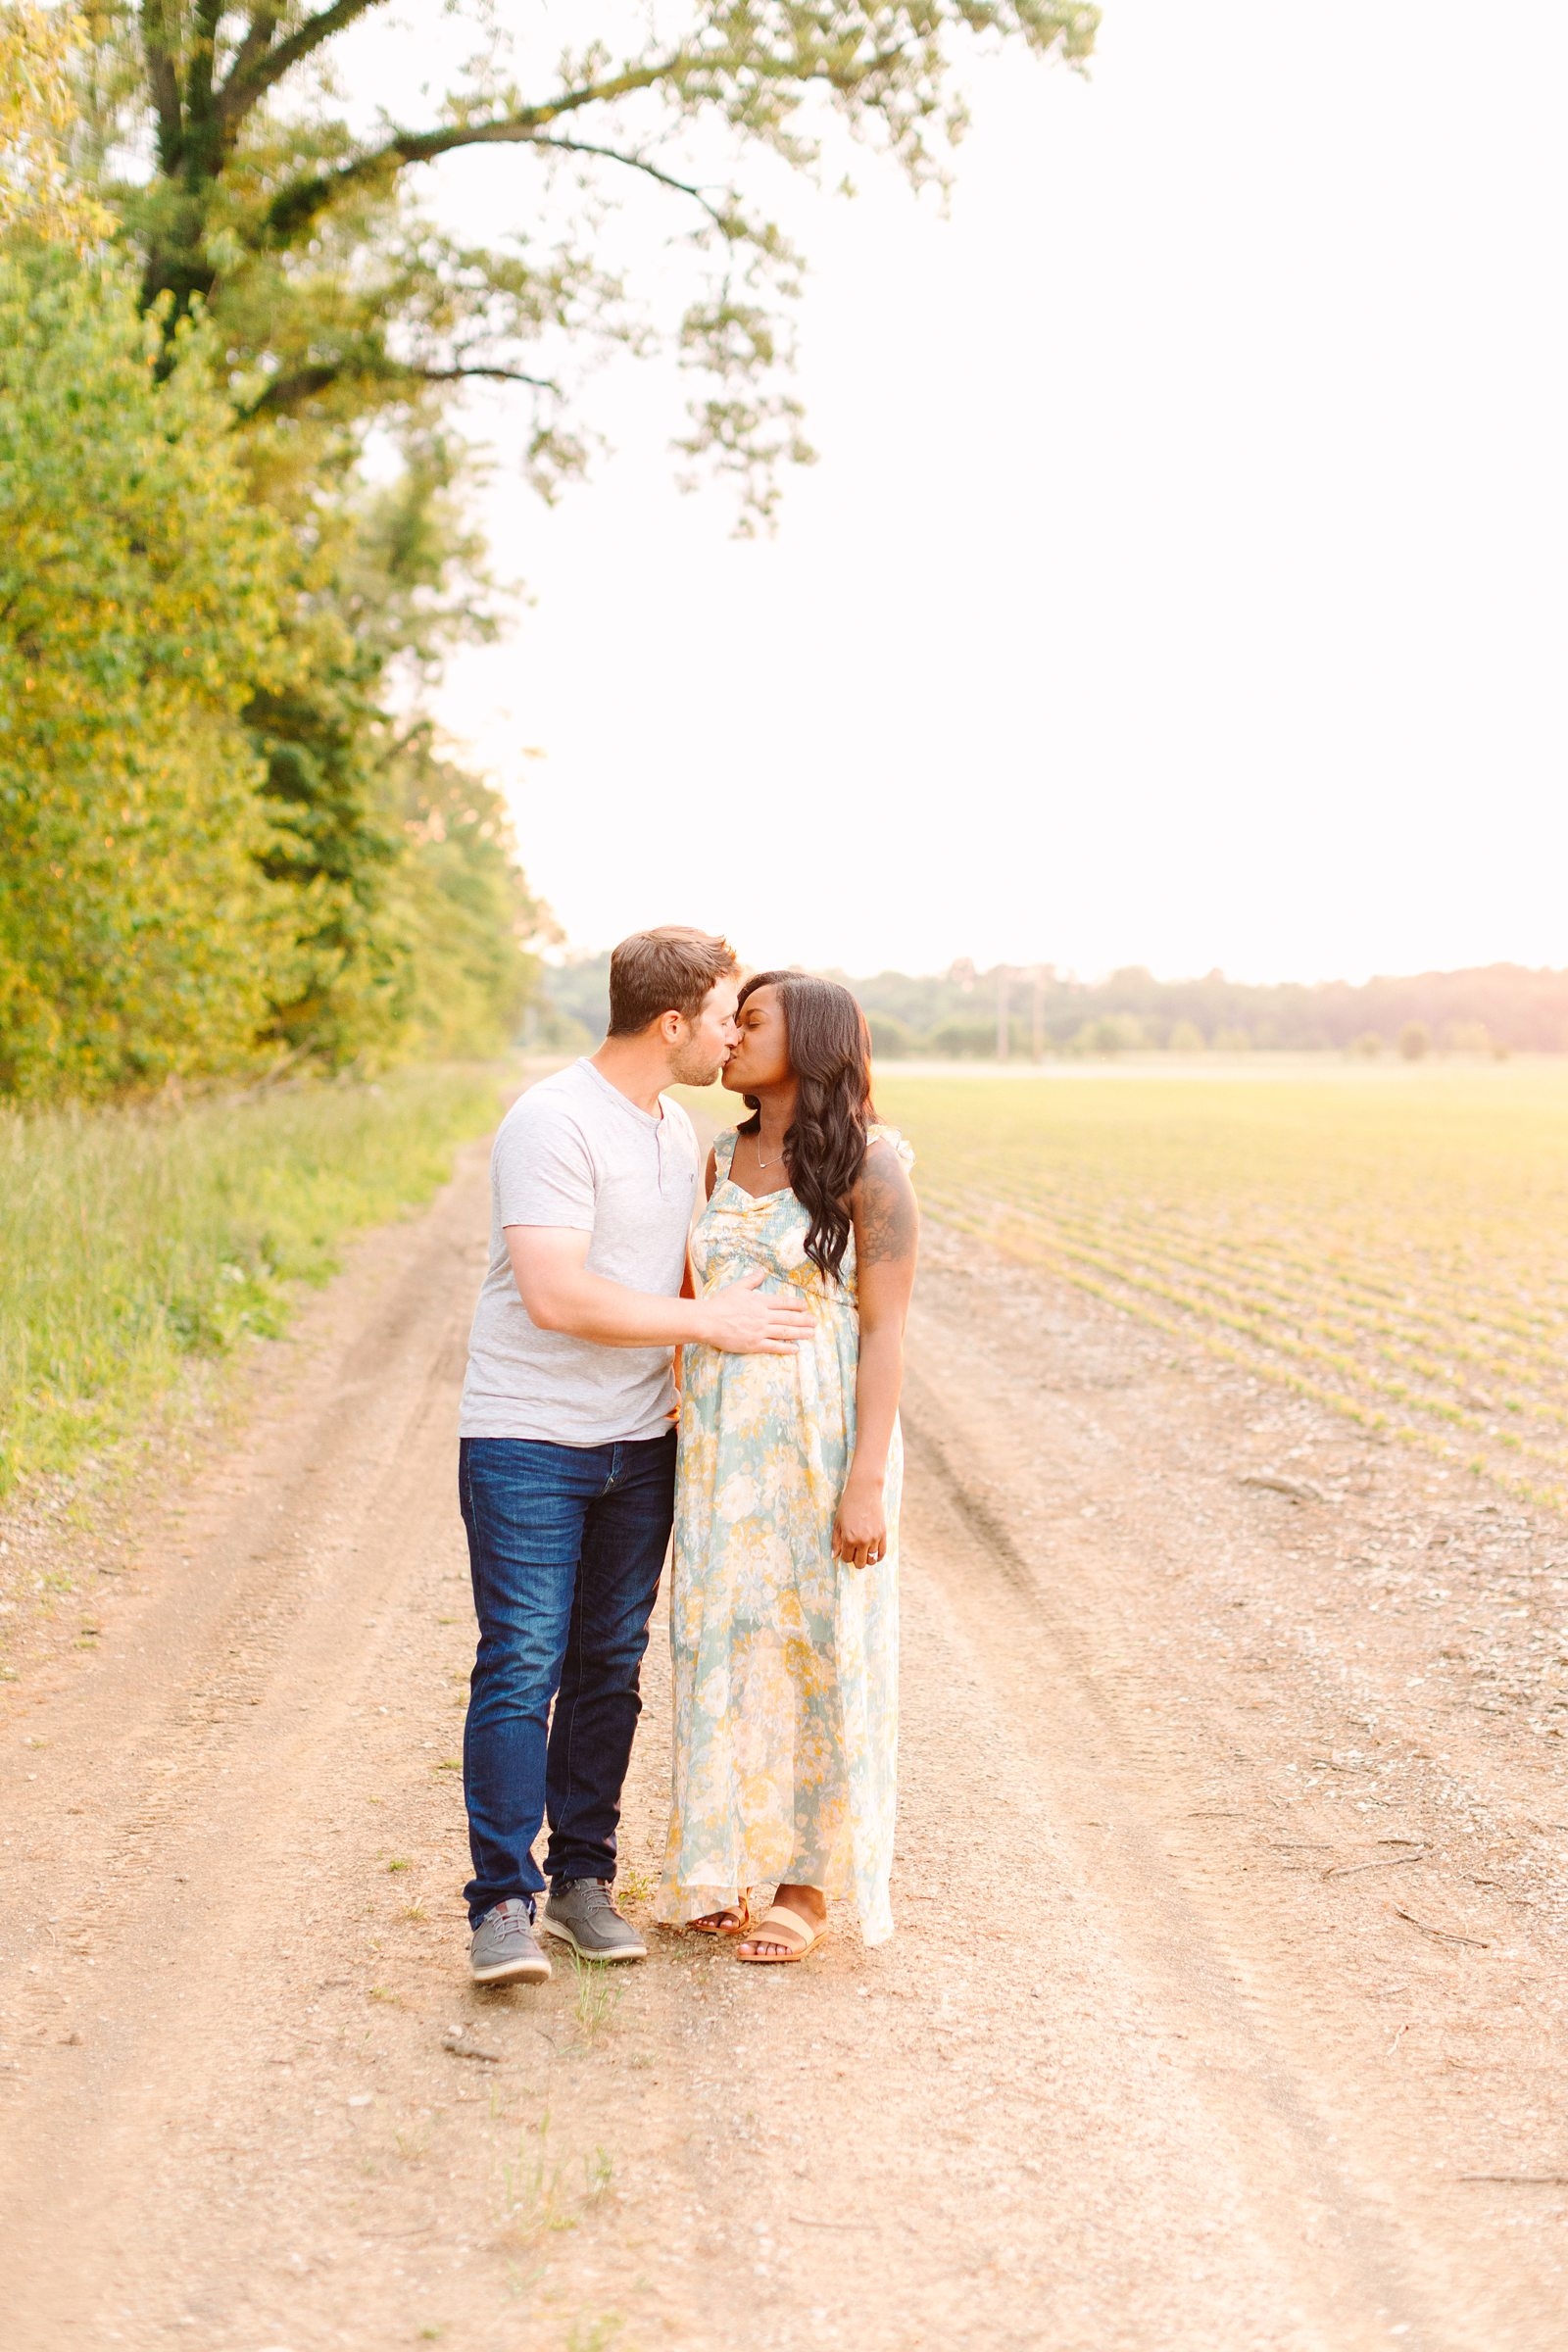 A Dreamy Rockport Indiana Maternity Session | Bret and Brandie Photography36.jpg